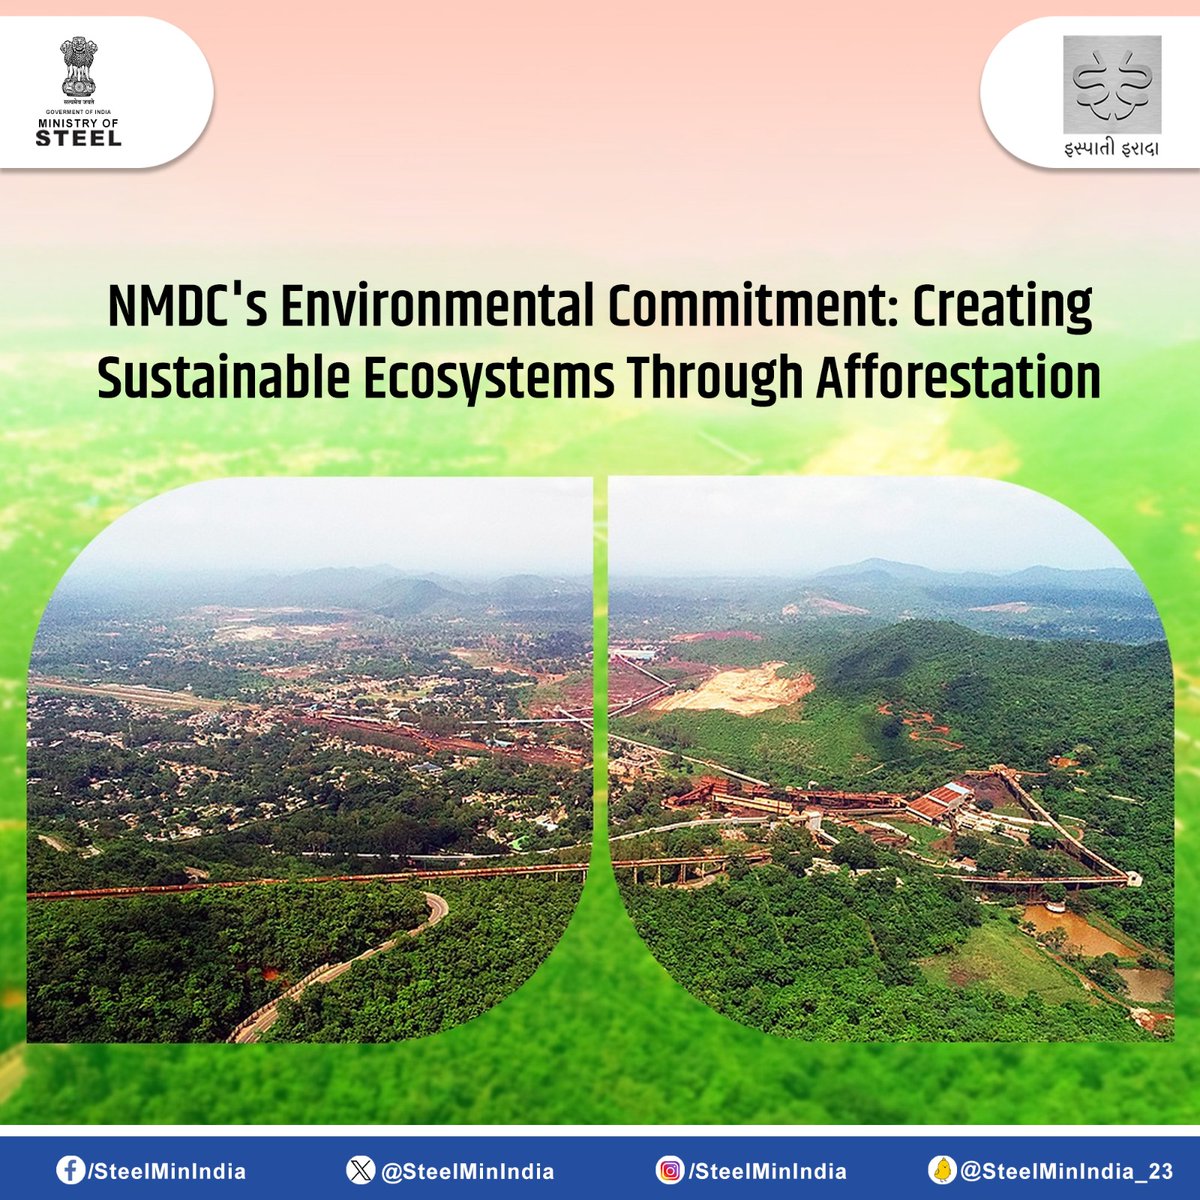 #NMDC's dedication to environmental stewardship shines as they plant over 3 million trees in sensitive regions, fostering a sustainable future.🌳 #Afforestation #EnvironmentalStewardship